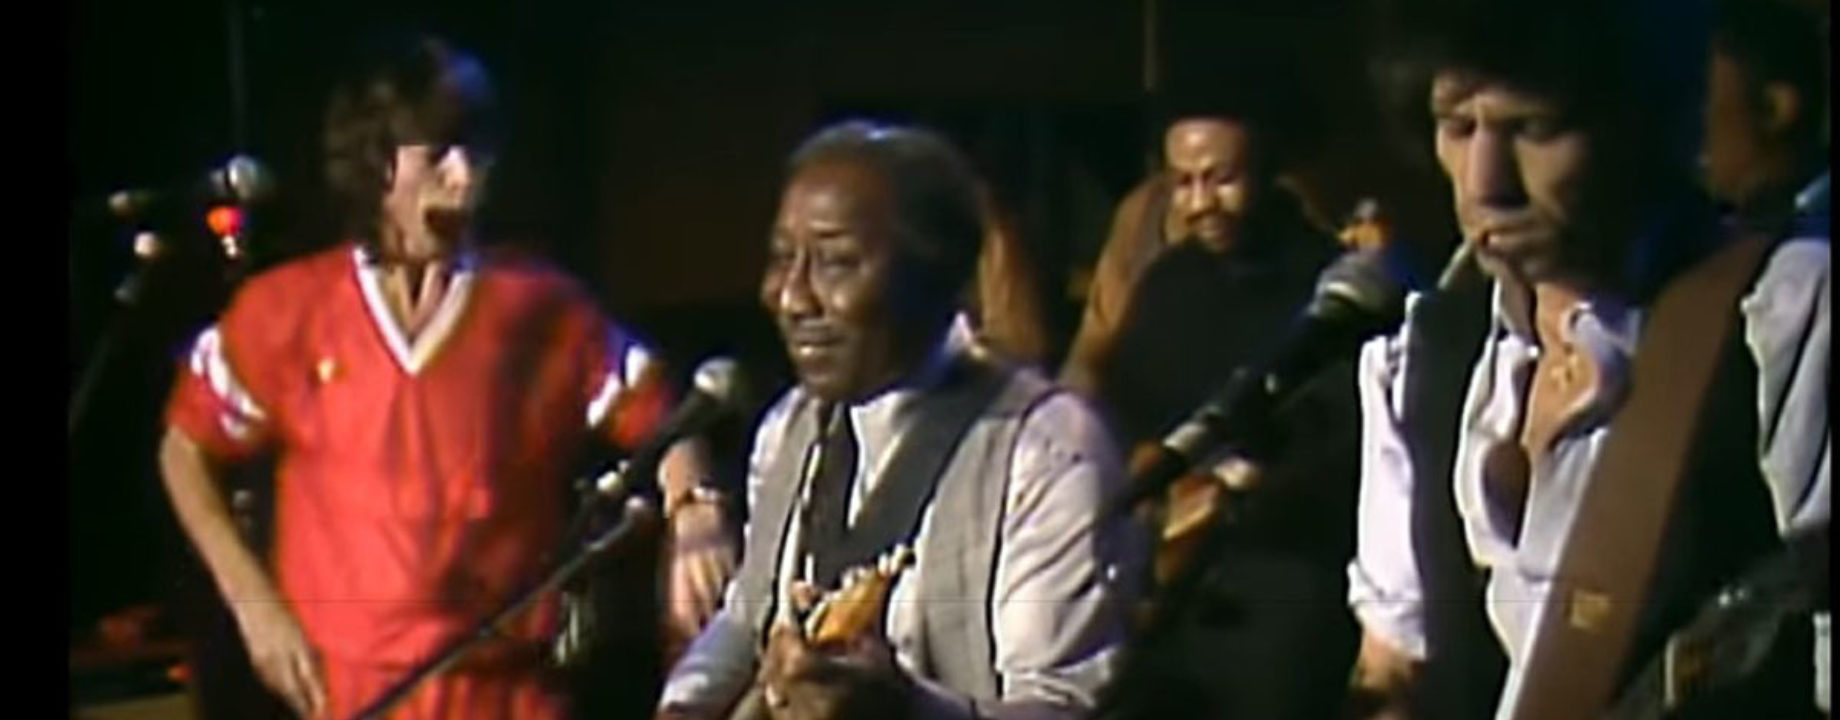 Blues legend Muddy Waters performs awesome live blues with the Rolling Stones 07